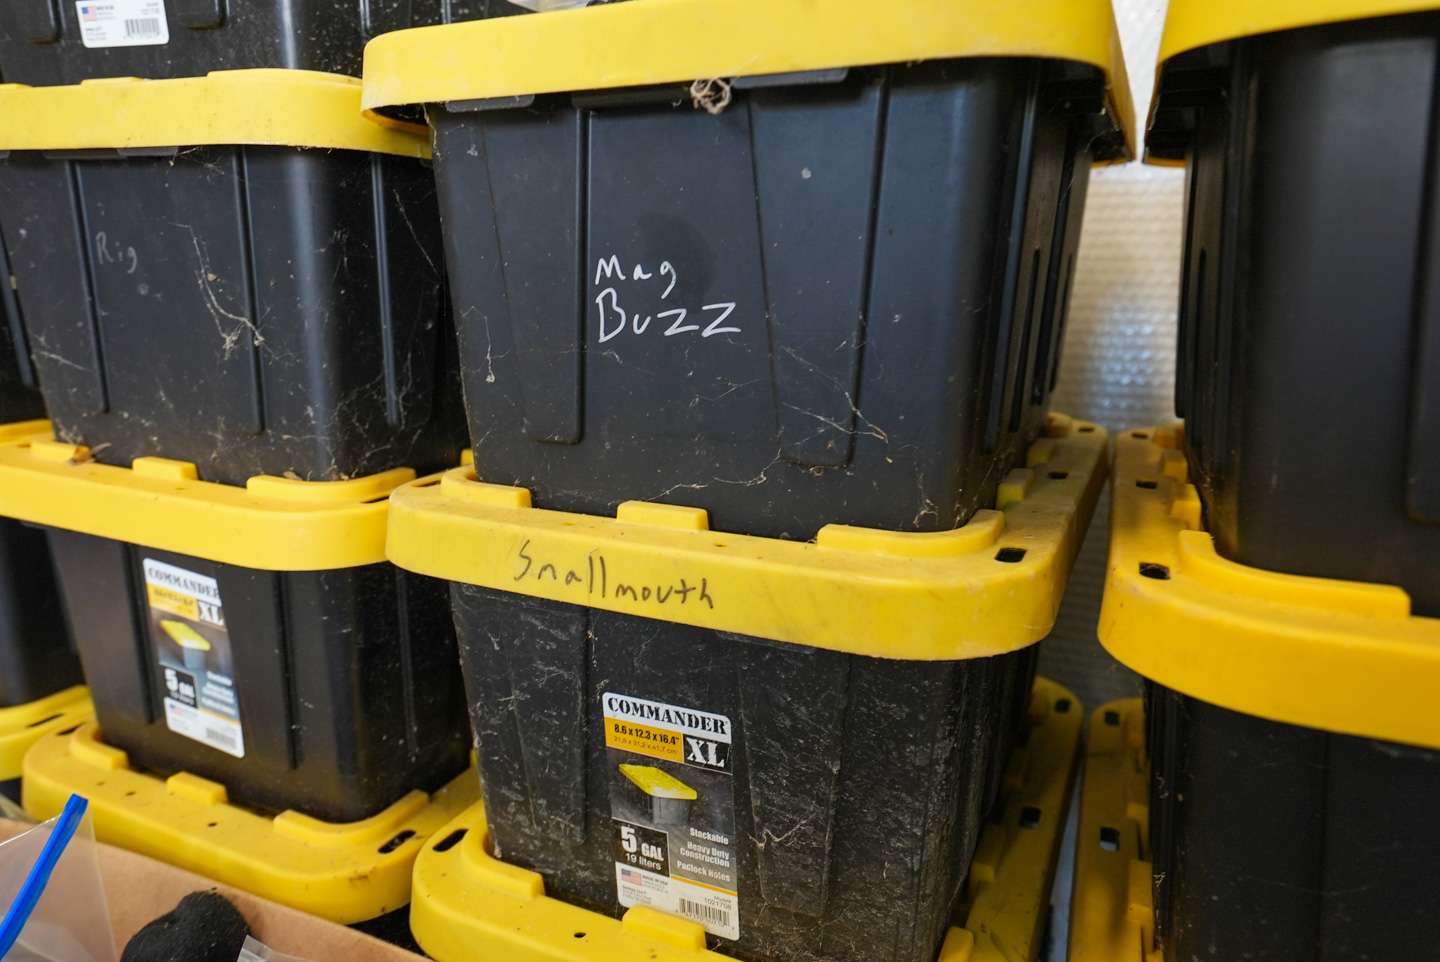 Davis carries his bulk tackle in giant tubs. Each tub is labeled for easy access when he needs to restock an item or take a box with him on the road. 